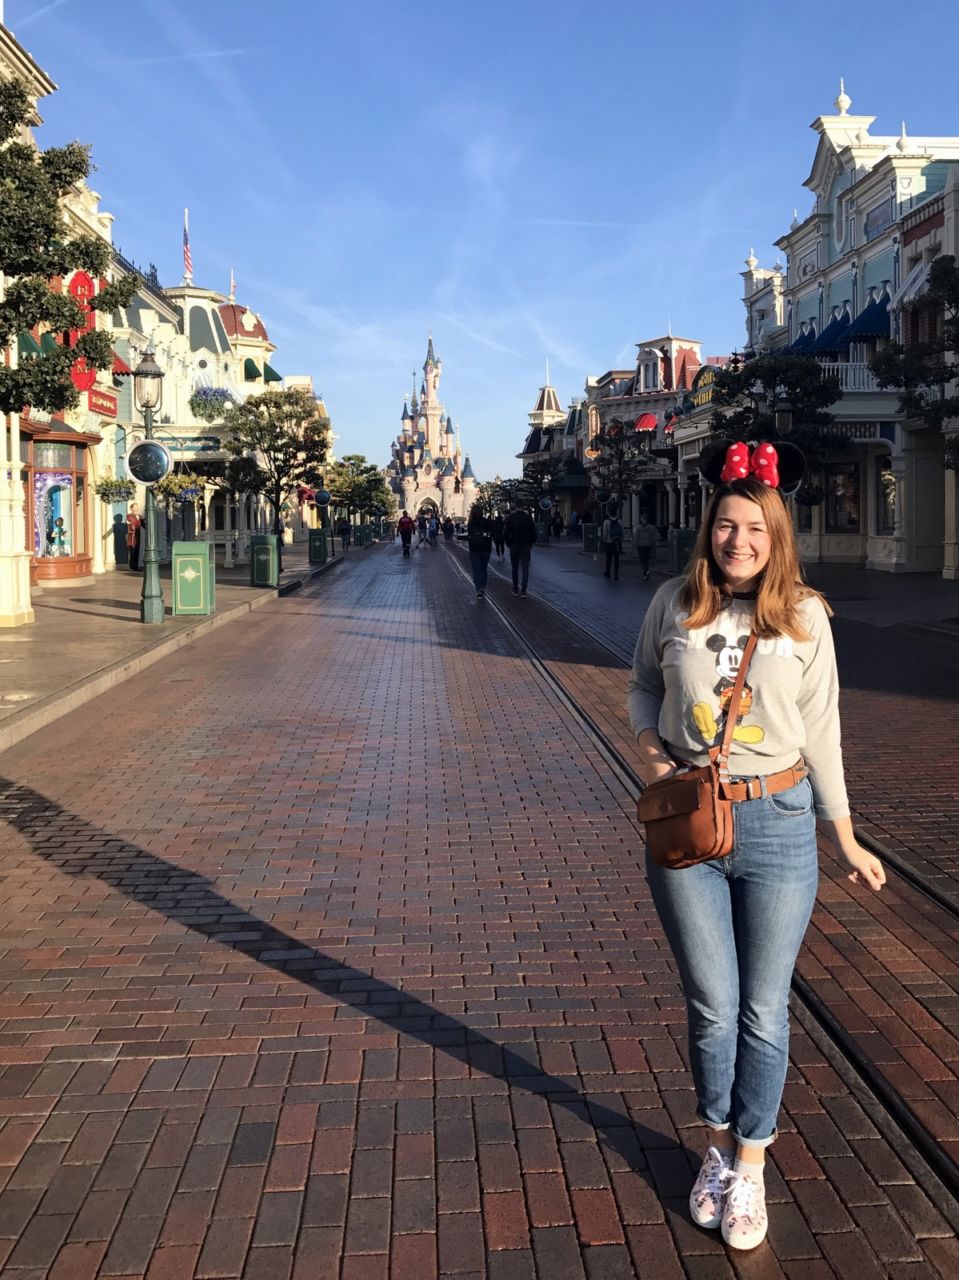 Disneyland Paris outfit in September with Mickey jumper & jeans